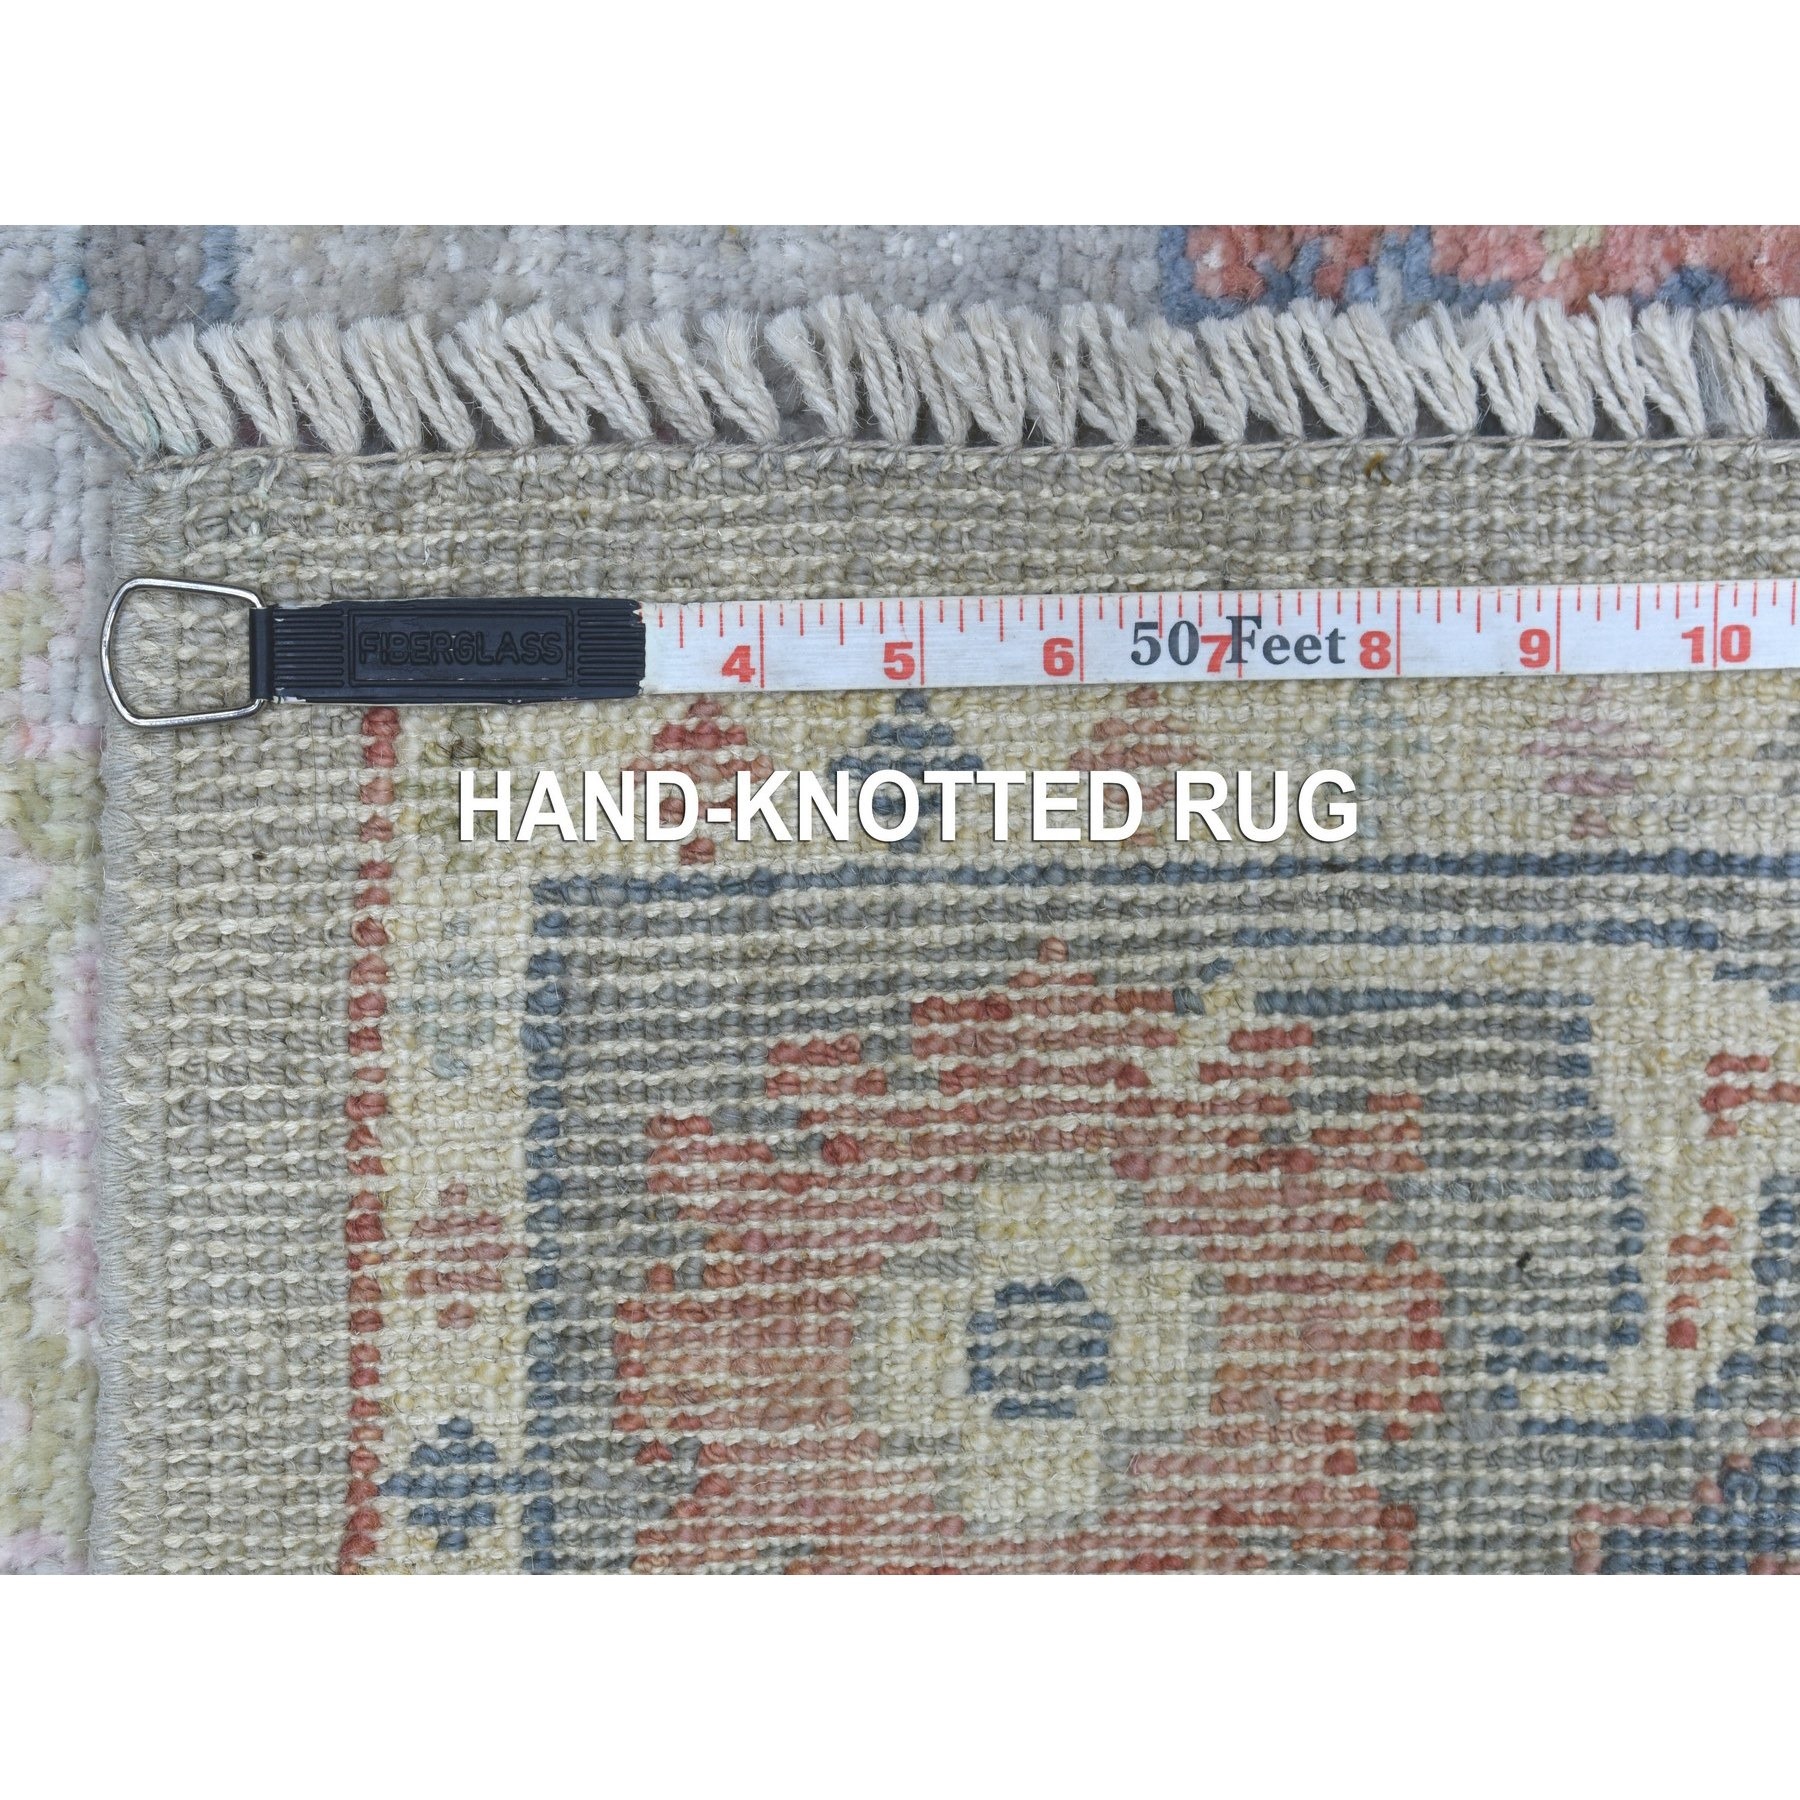 transitional Wool Hand-Knotted Area Rug 3'2